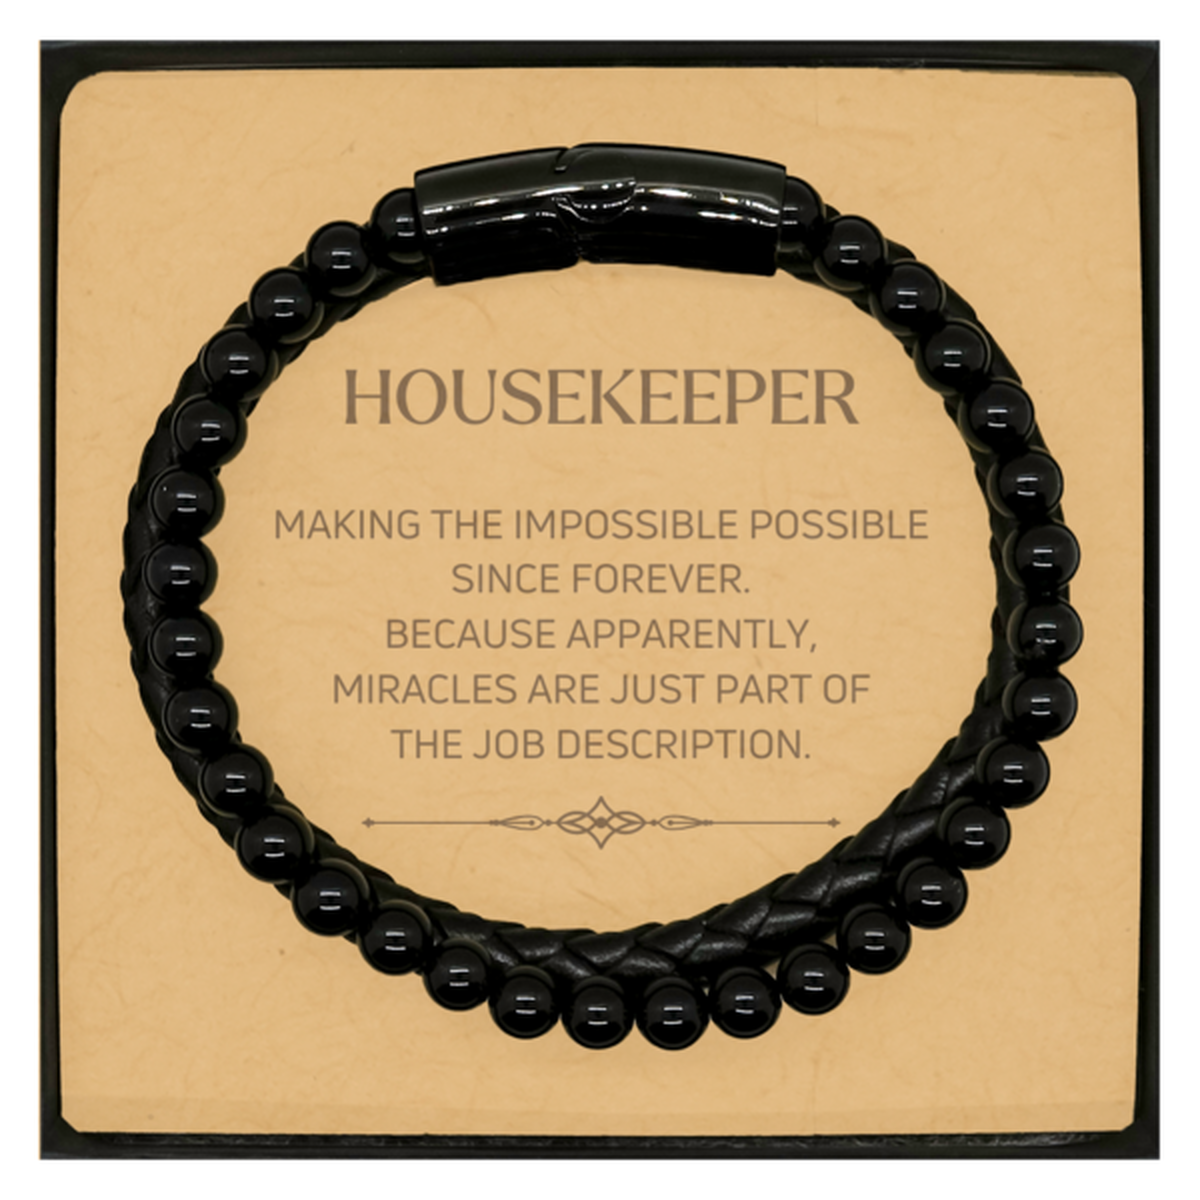 Funny Housekeeper Gifts, Miracles are just part of the job description, Inspirational Birthday Christmas Stone Leather Bracelets For Housekeeper, Men, Women, Coworkers, Friends, Boss